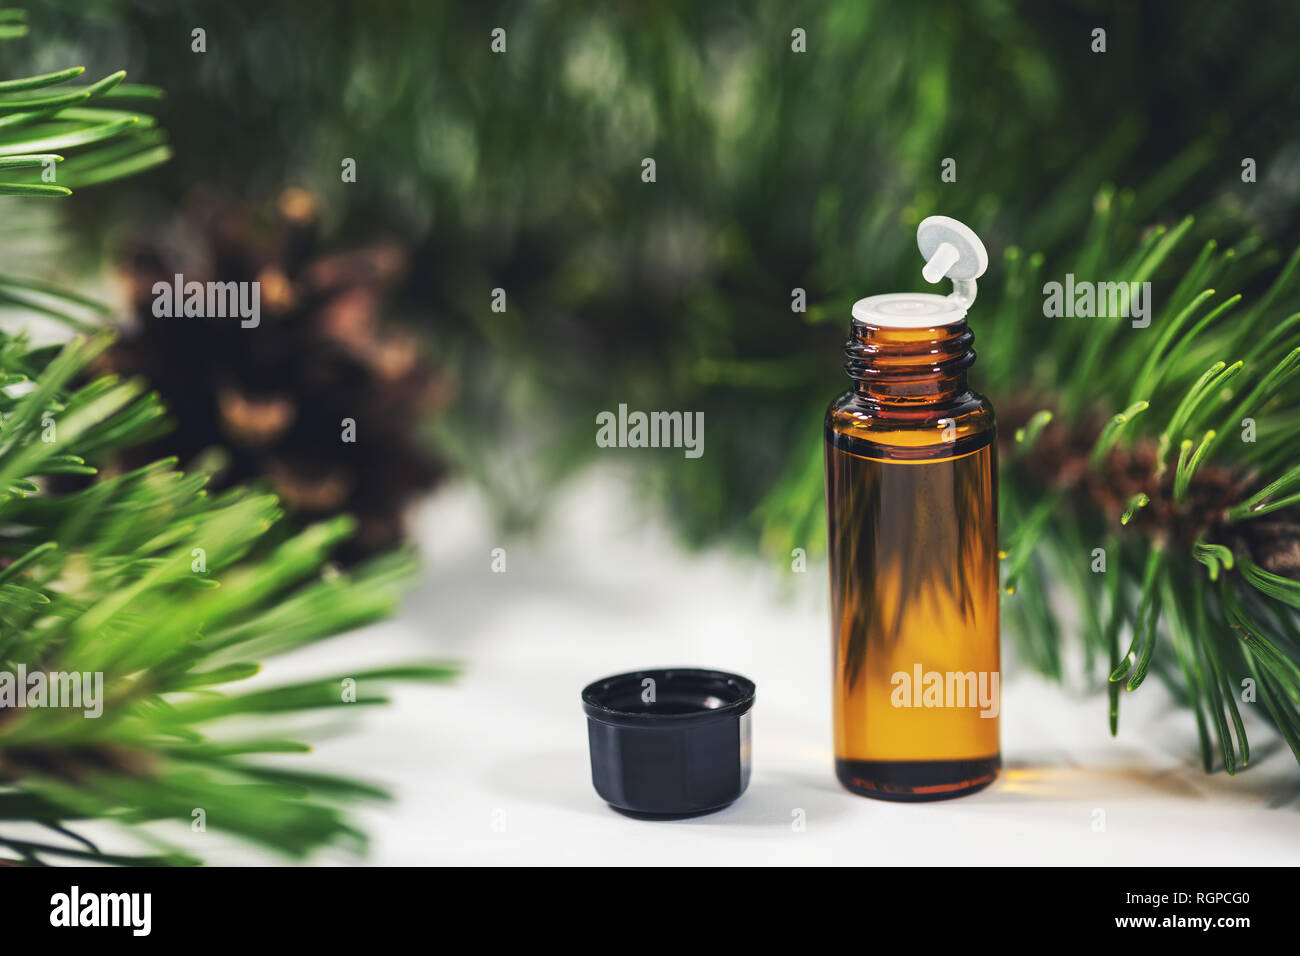 small bottle of essential pine tree oil Stock Photo